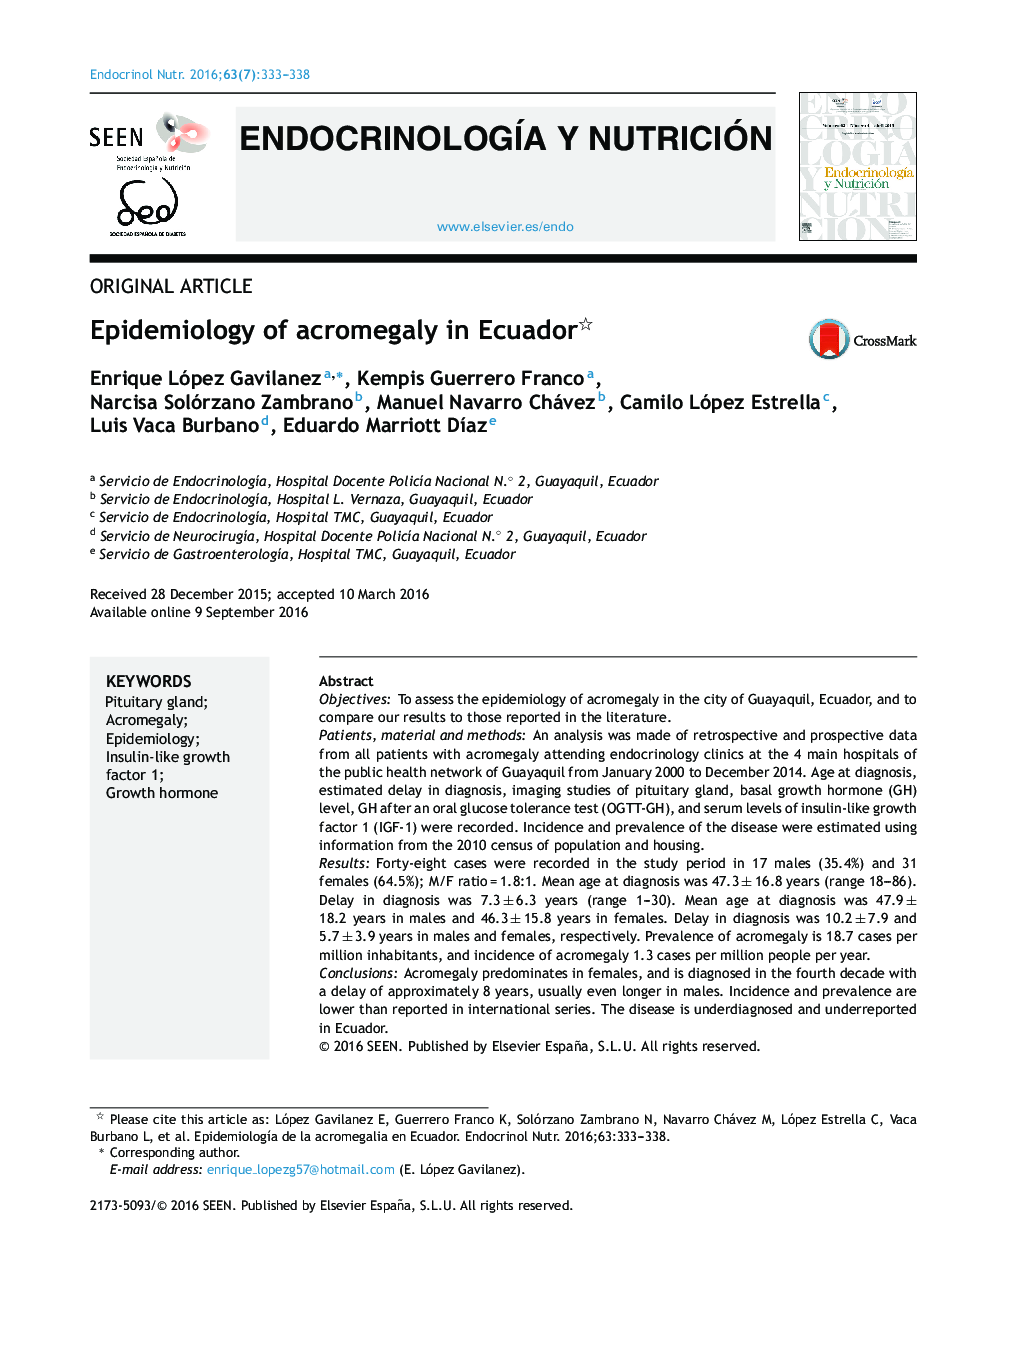 Epidemiology of acromegaly in Ecuador